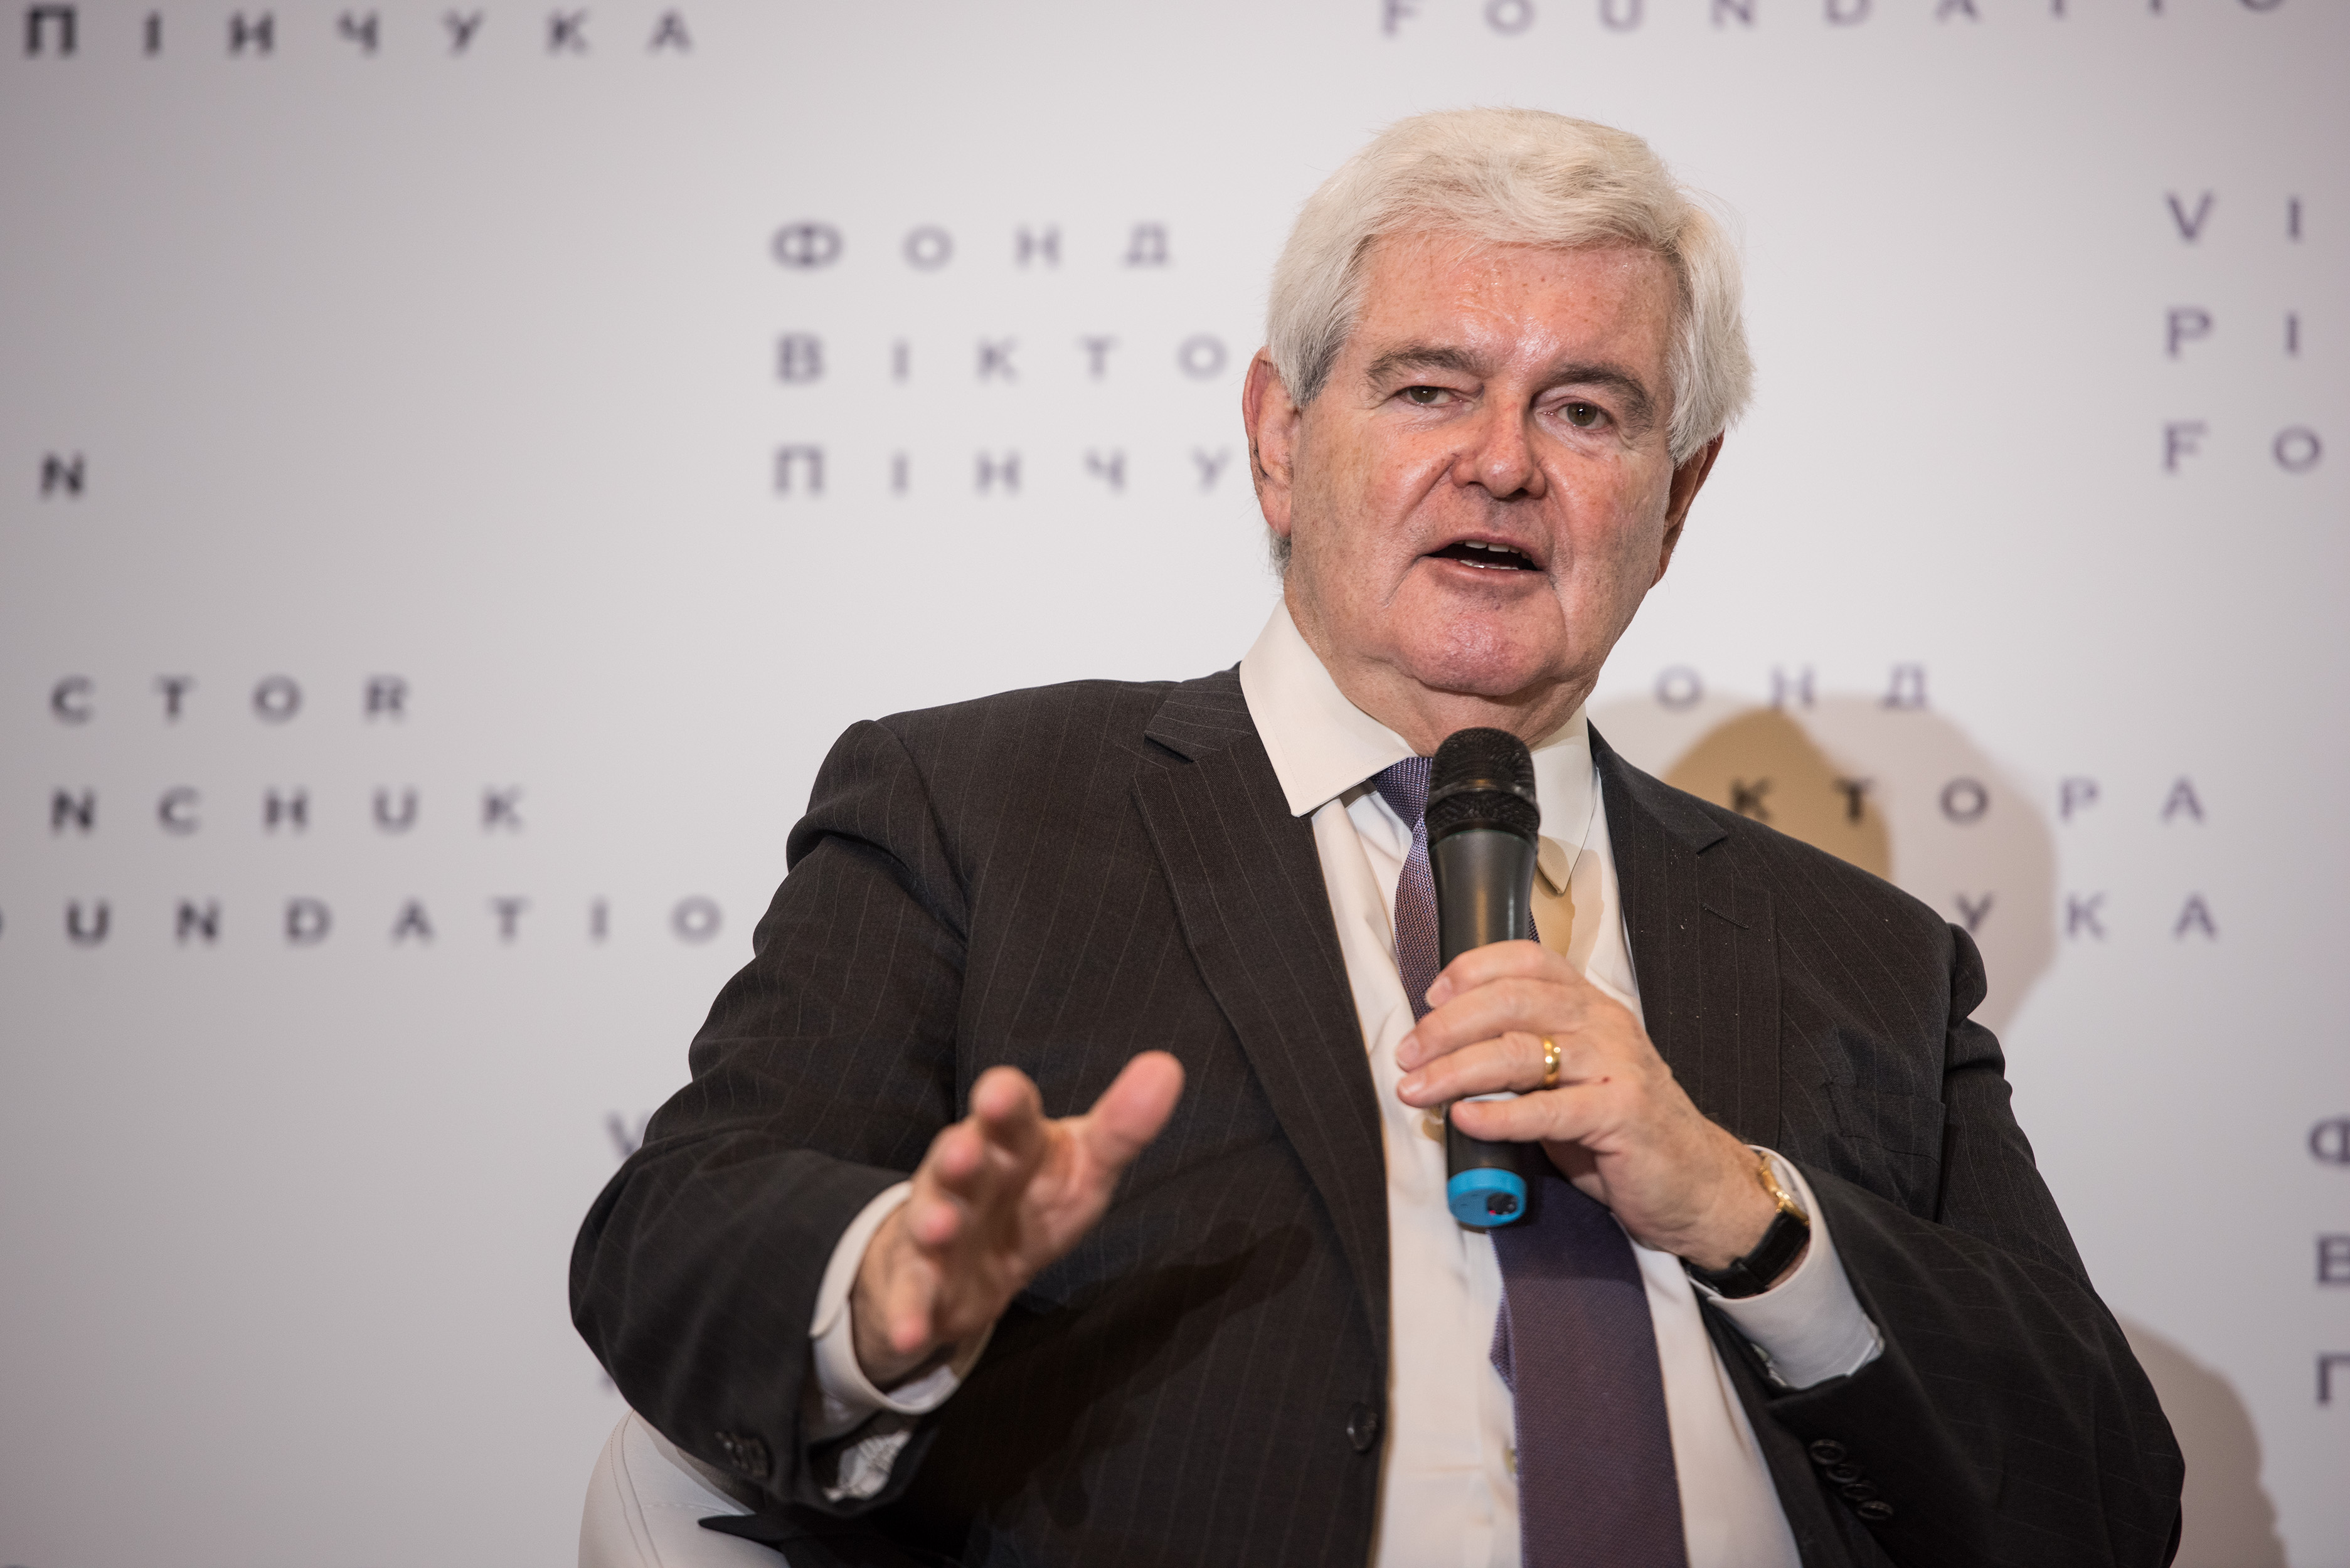 Public lecture by Newt Gingrich